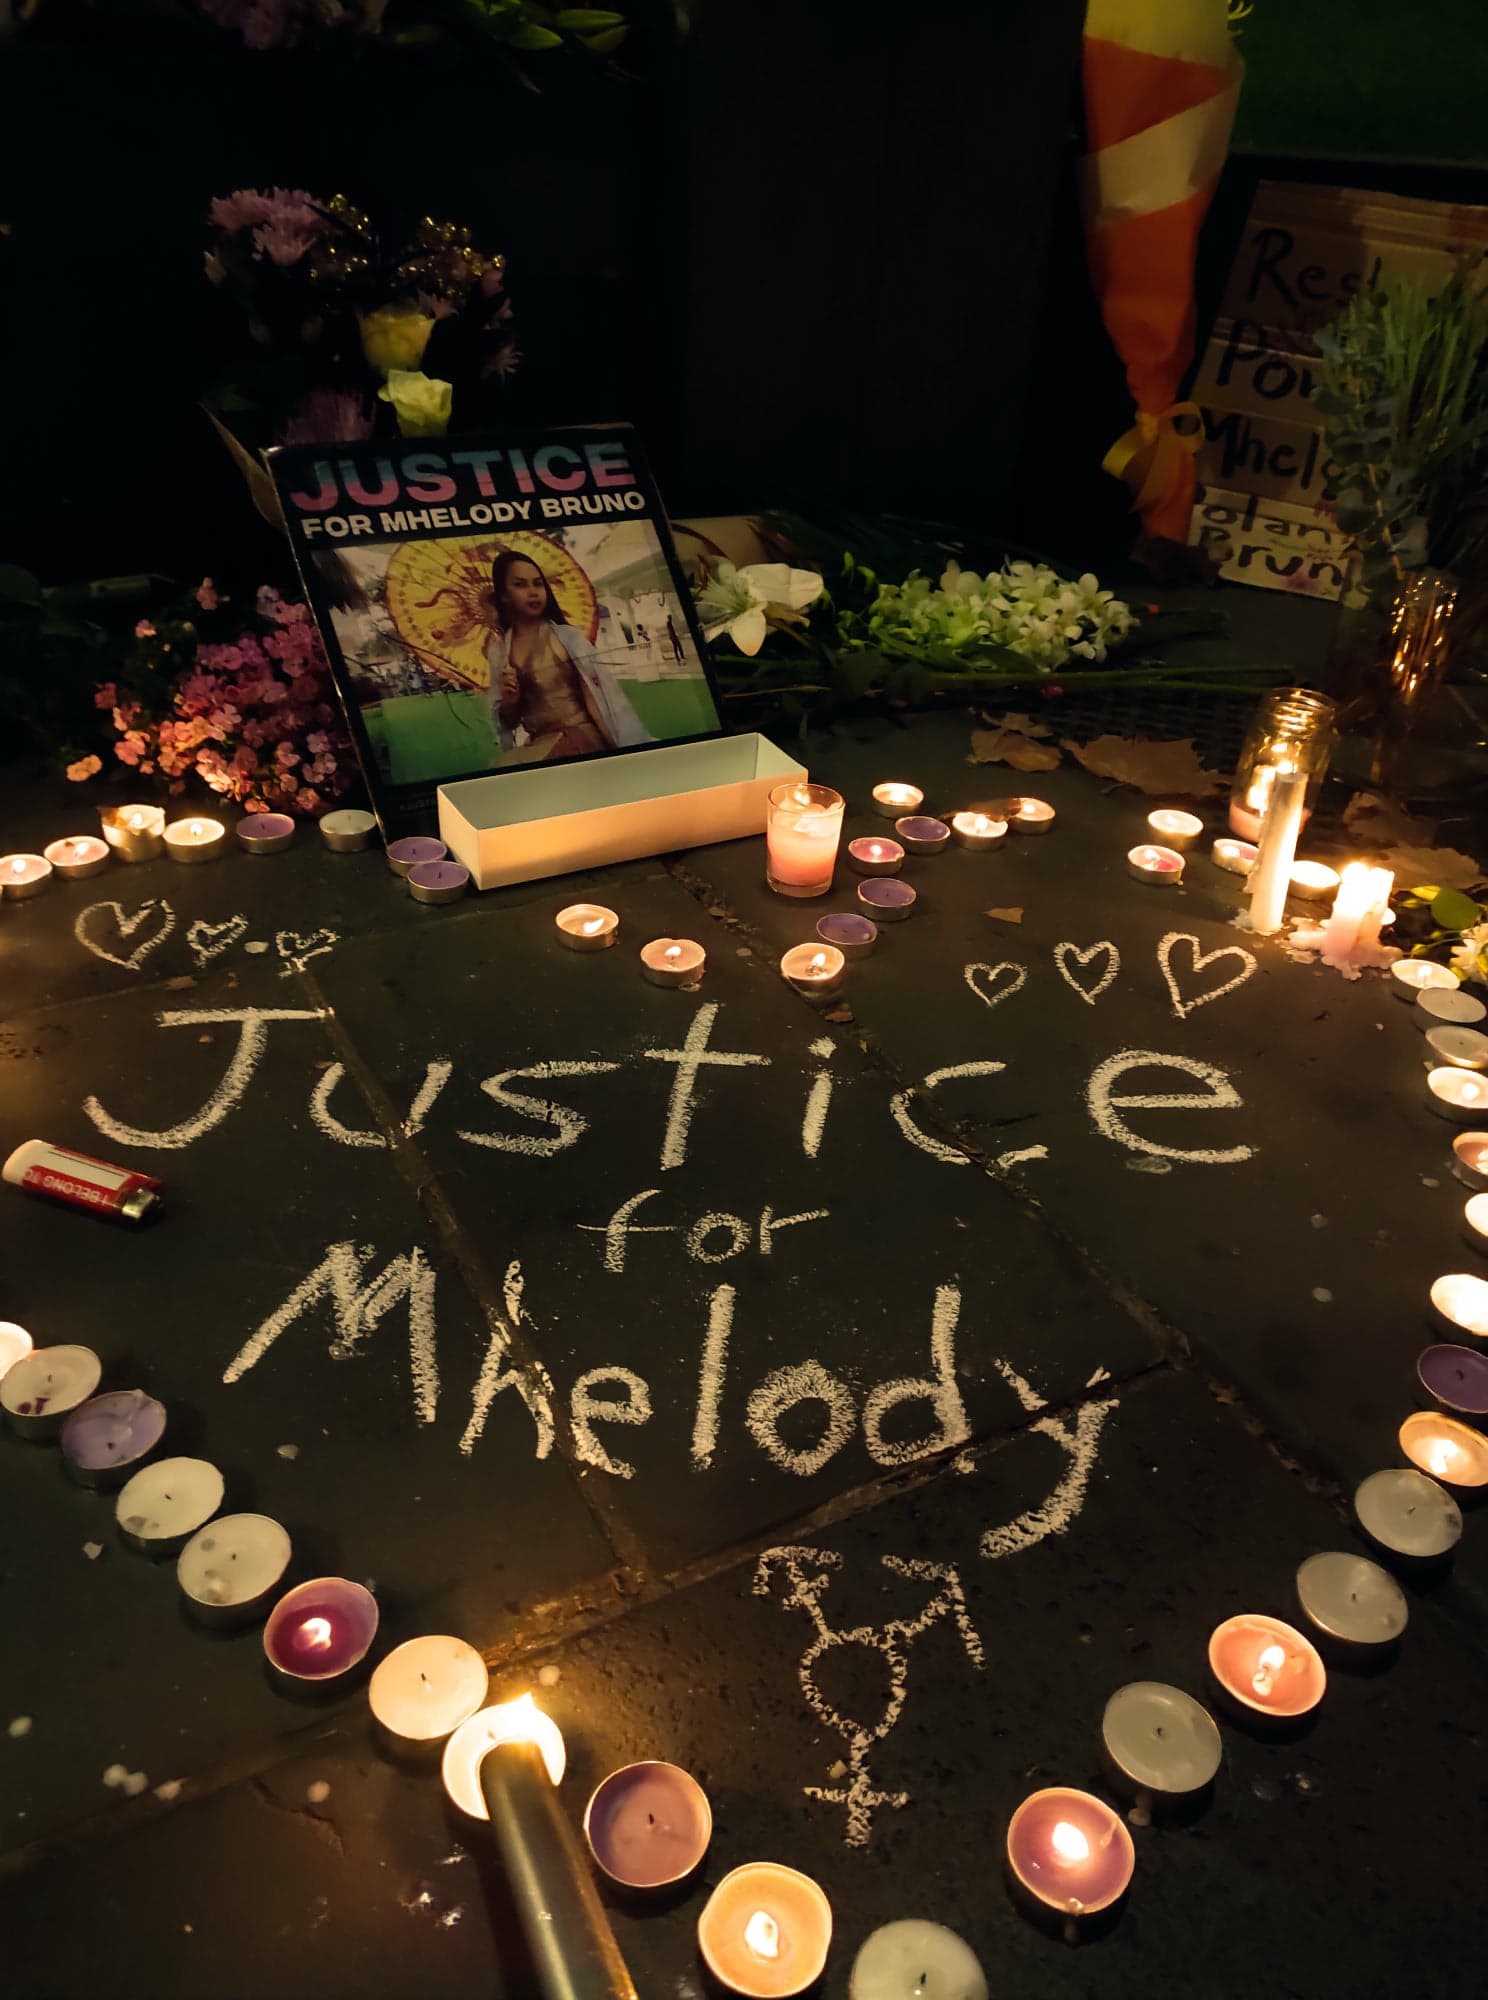 Justice for Mhelody candles and alter